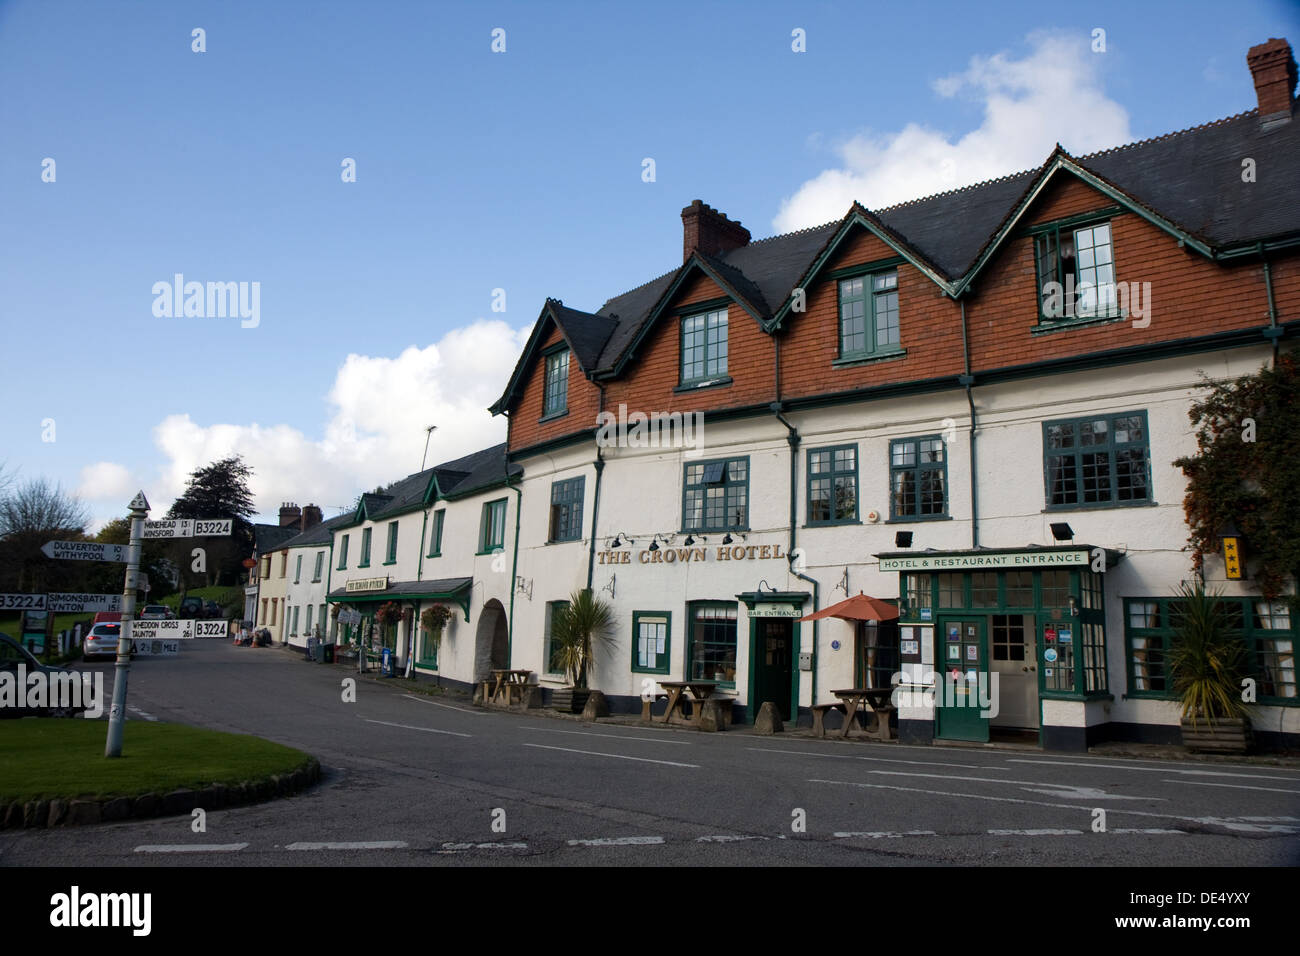 The Crown Hotel, Exford, Exmoor, Somerset, England, UK Stock Photo